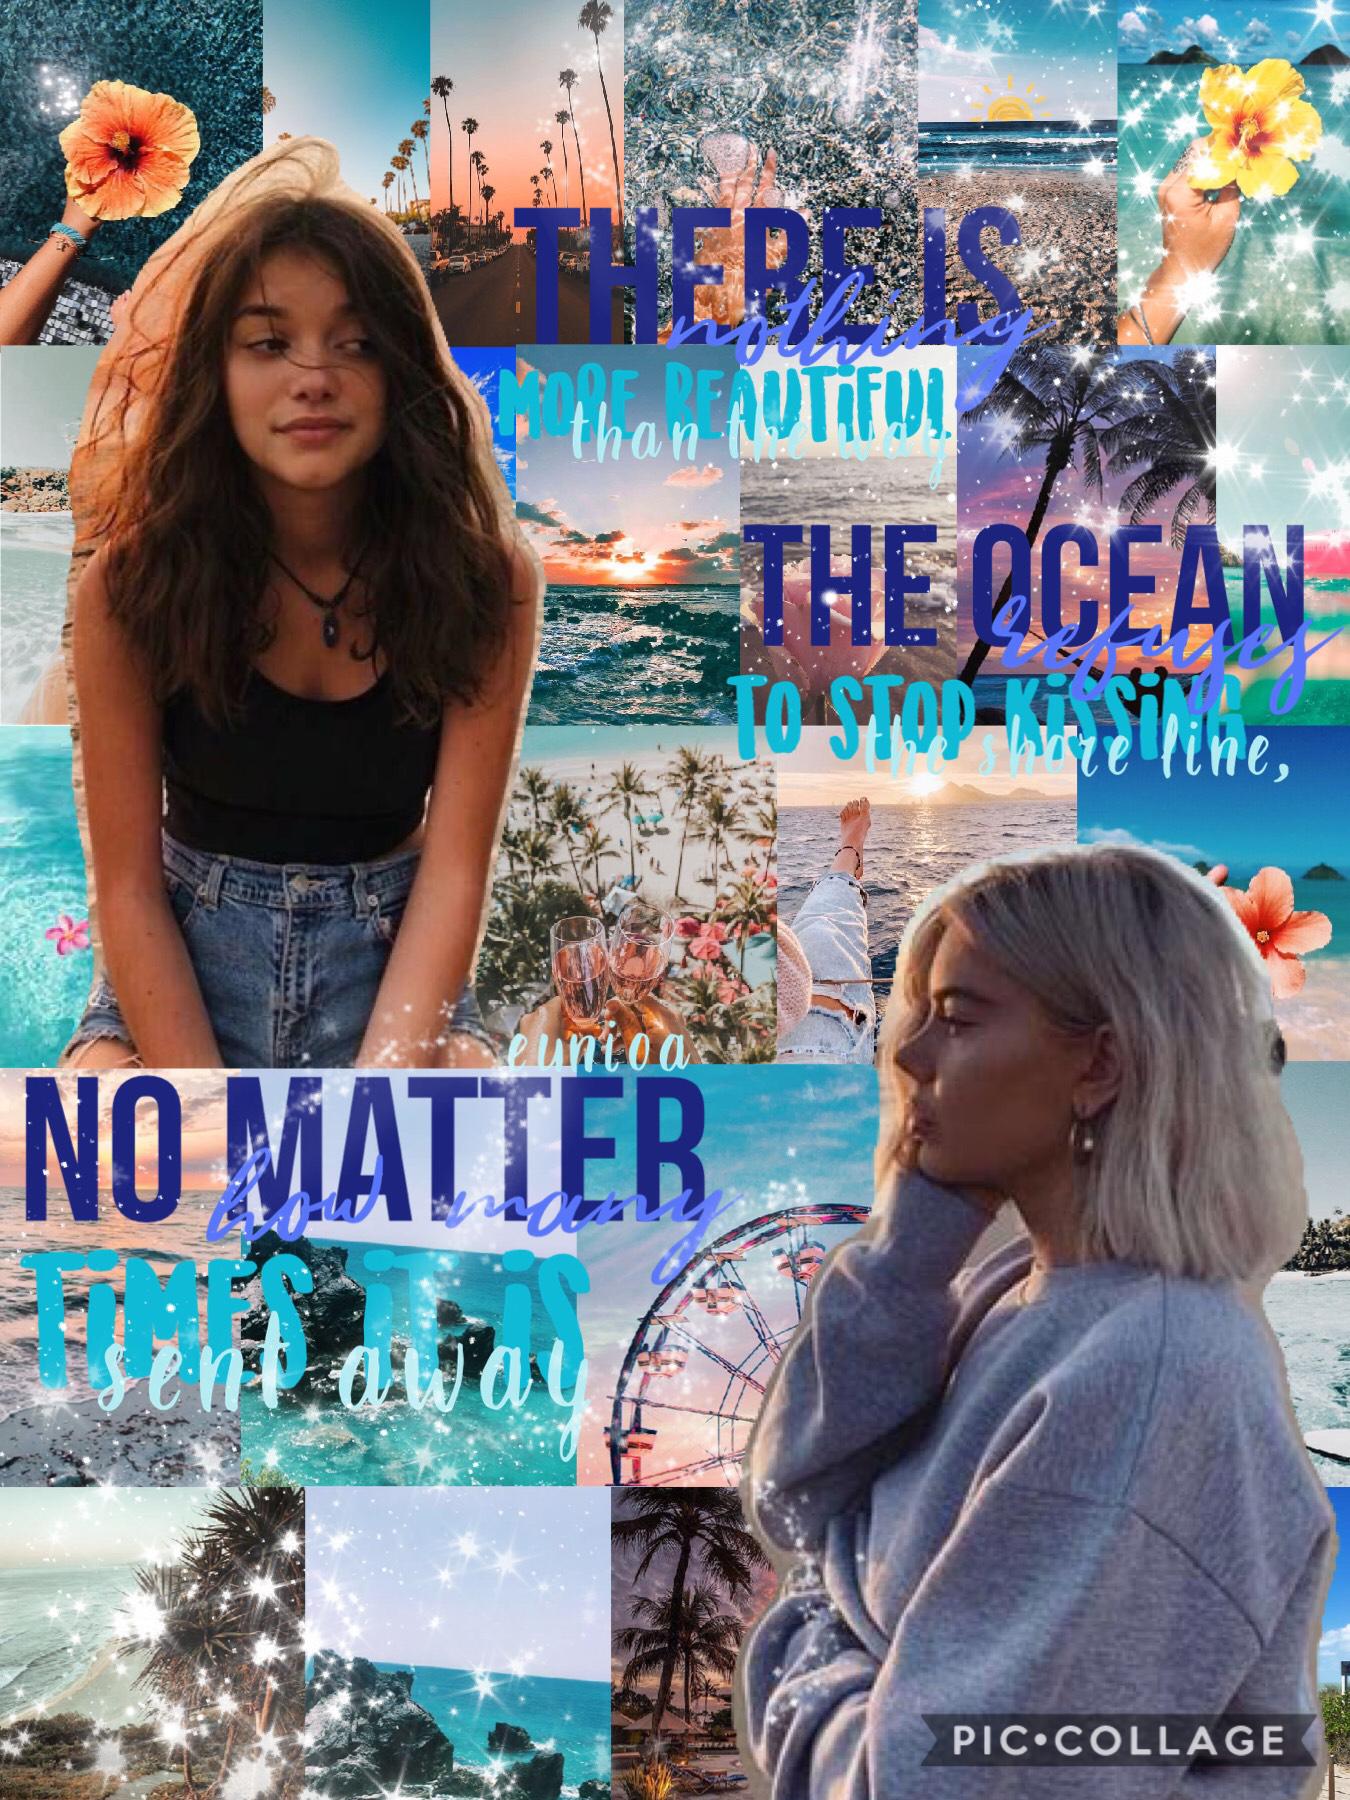 🌊TAP🌊
The first clue of my main account is I am on the path to 1,000. This collage took so long to make and the quote is just beautiful! Happy Monday! (5/17/21)